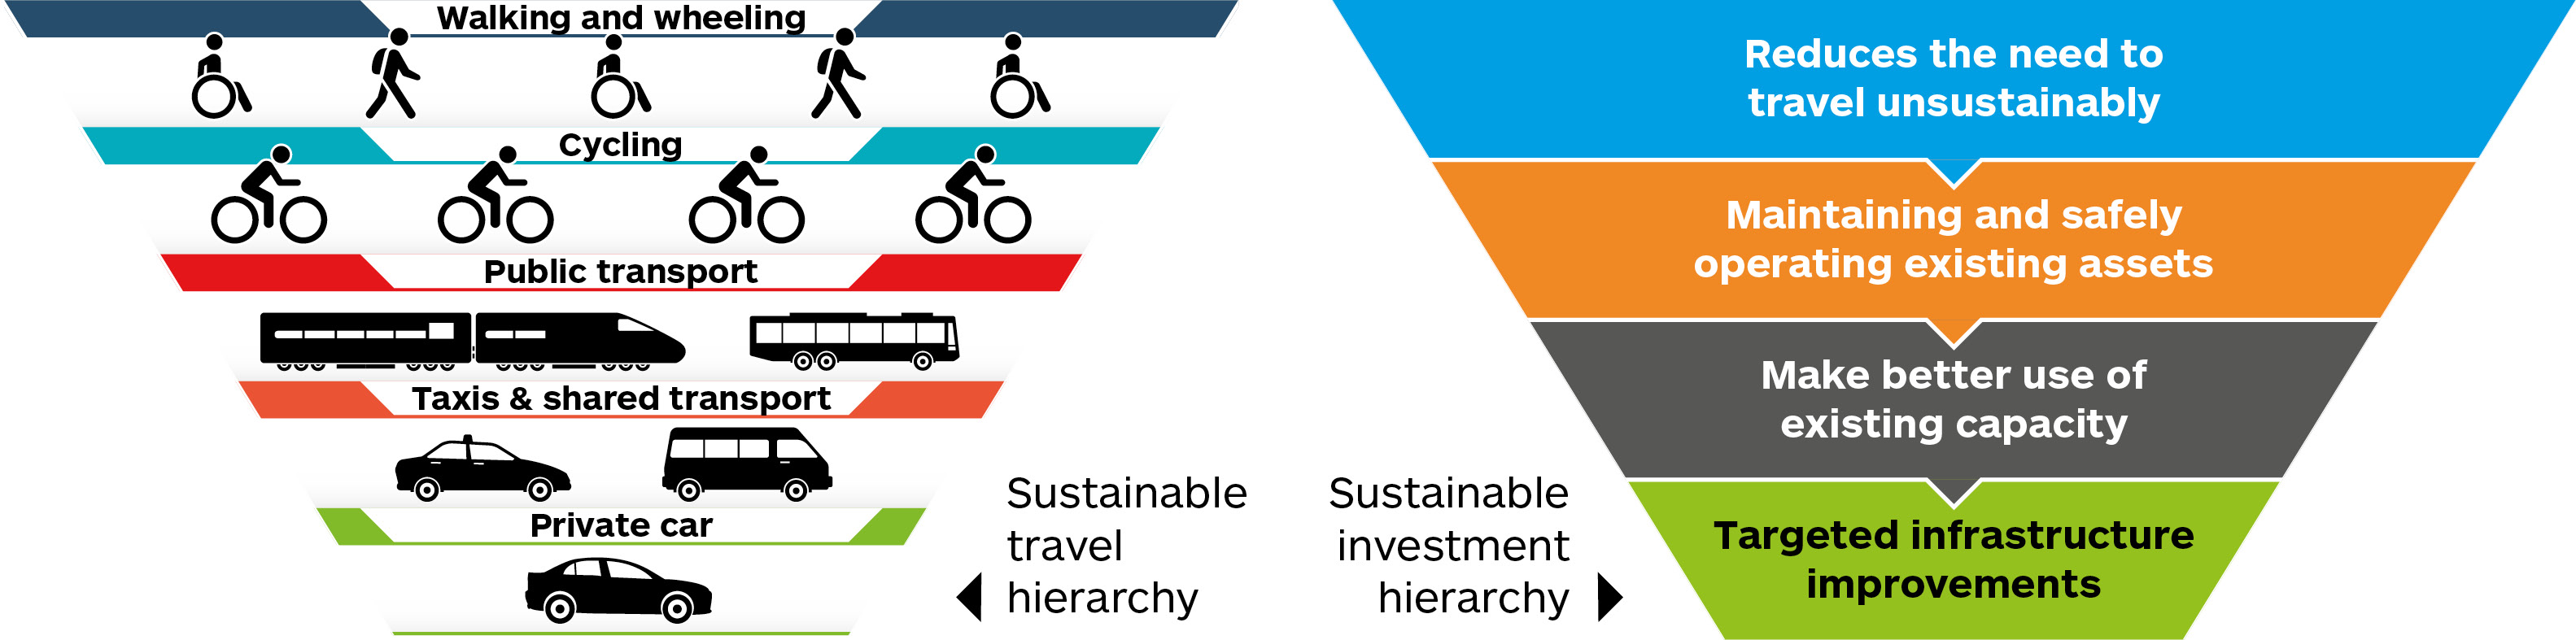 The sustainable travel hierarchy - as described in text below